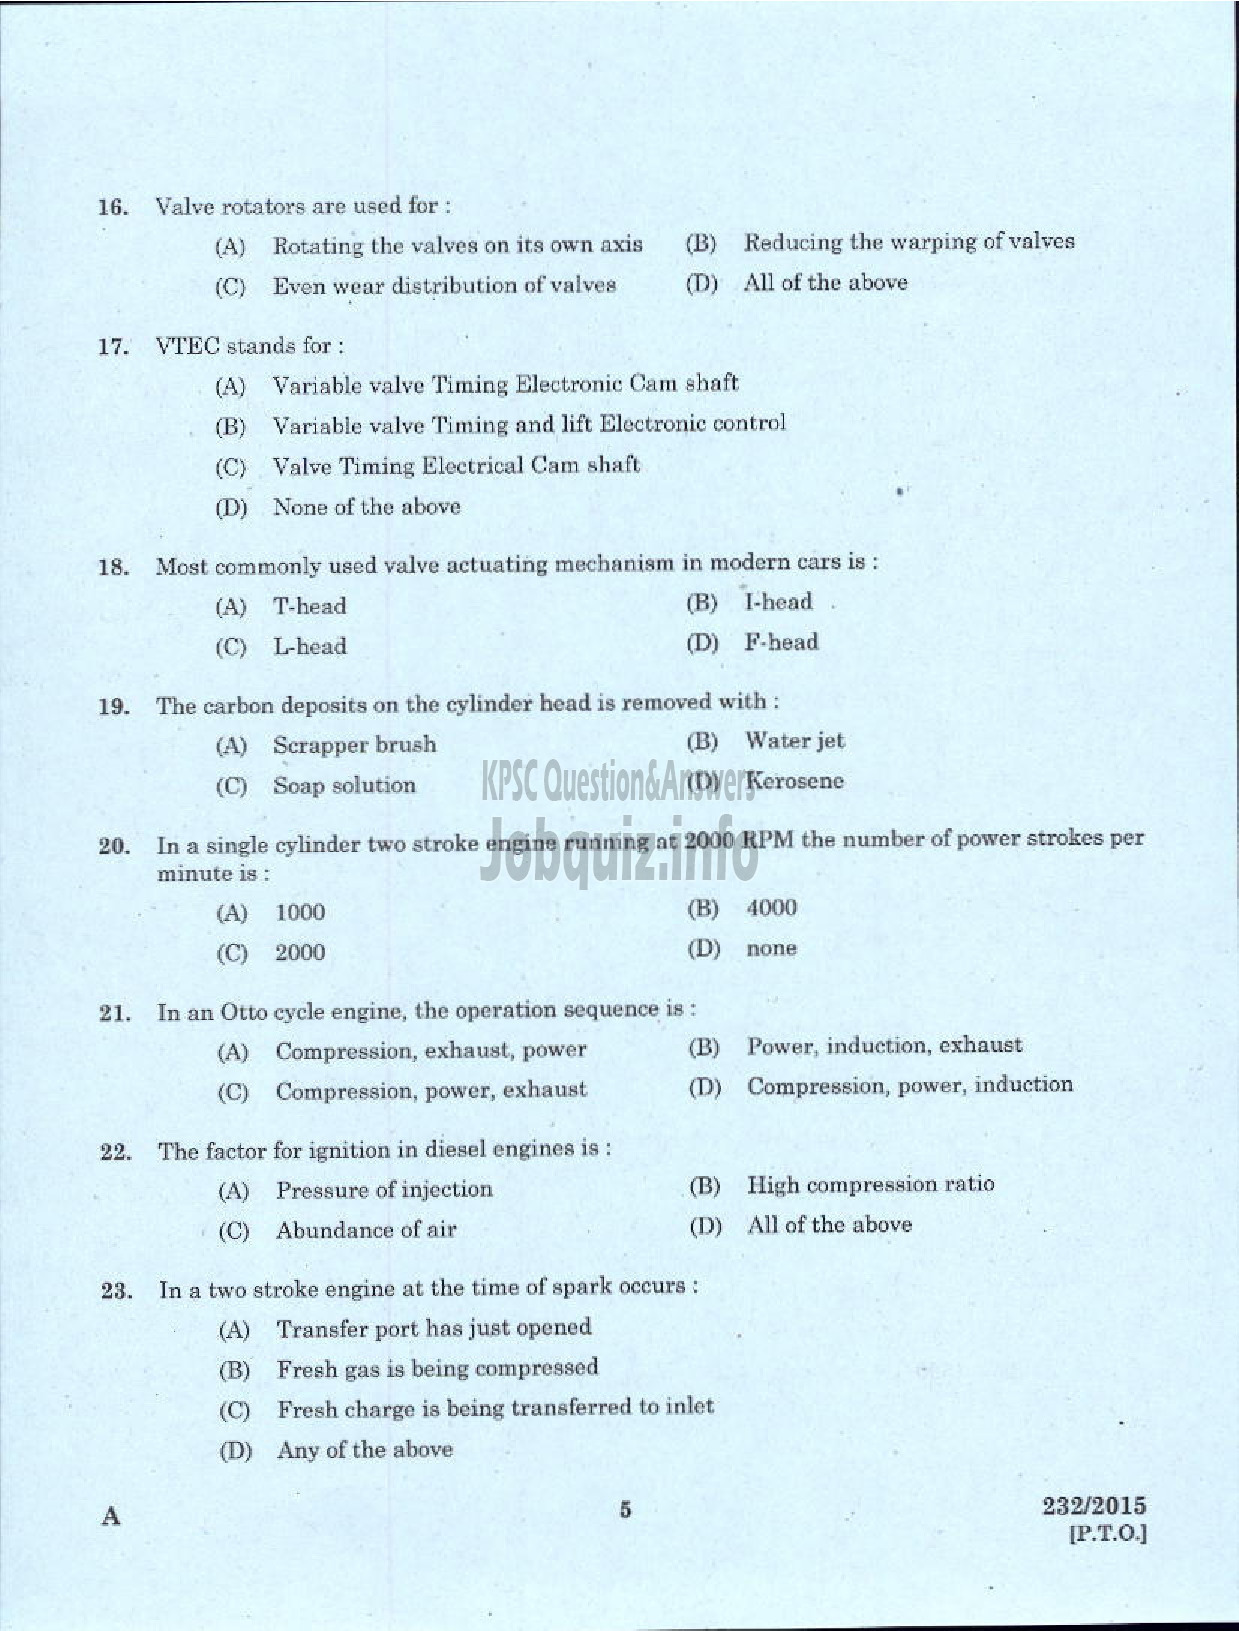 Kerala PSC Question Paper - MOTOR MECHANIC/STORE ASSISTANT GROUND WATER-3